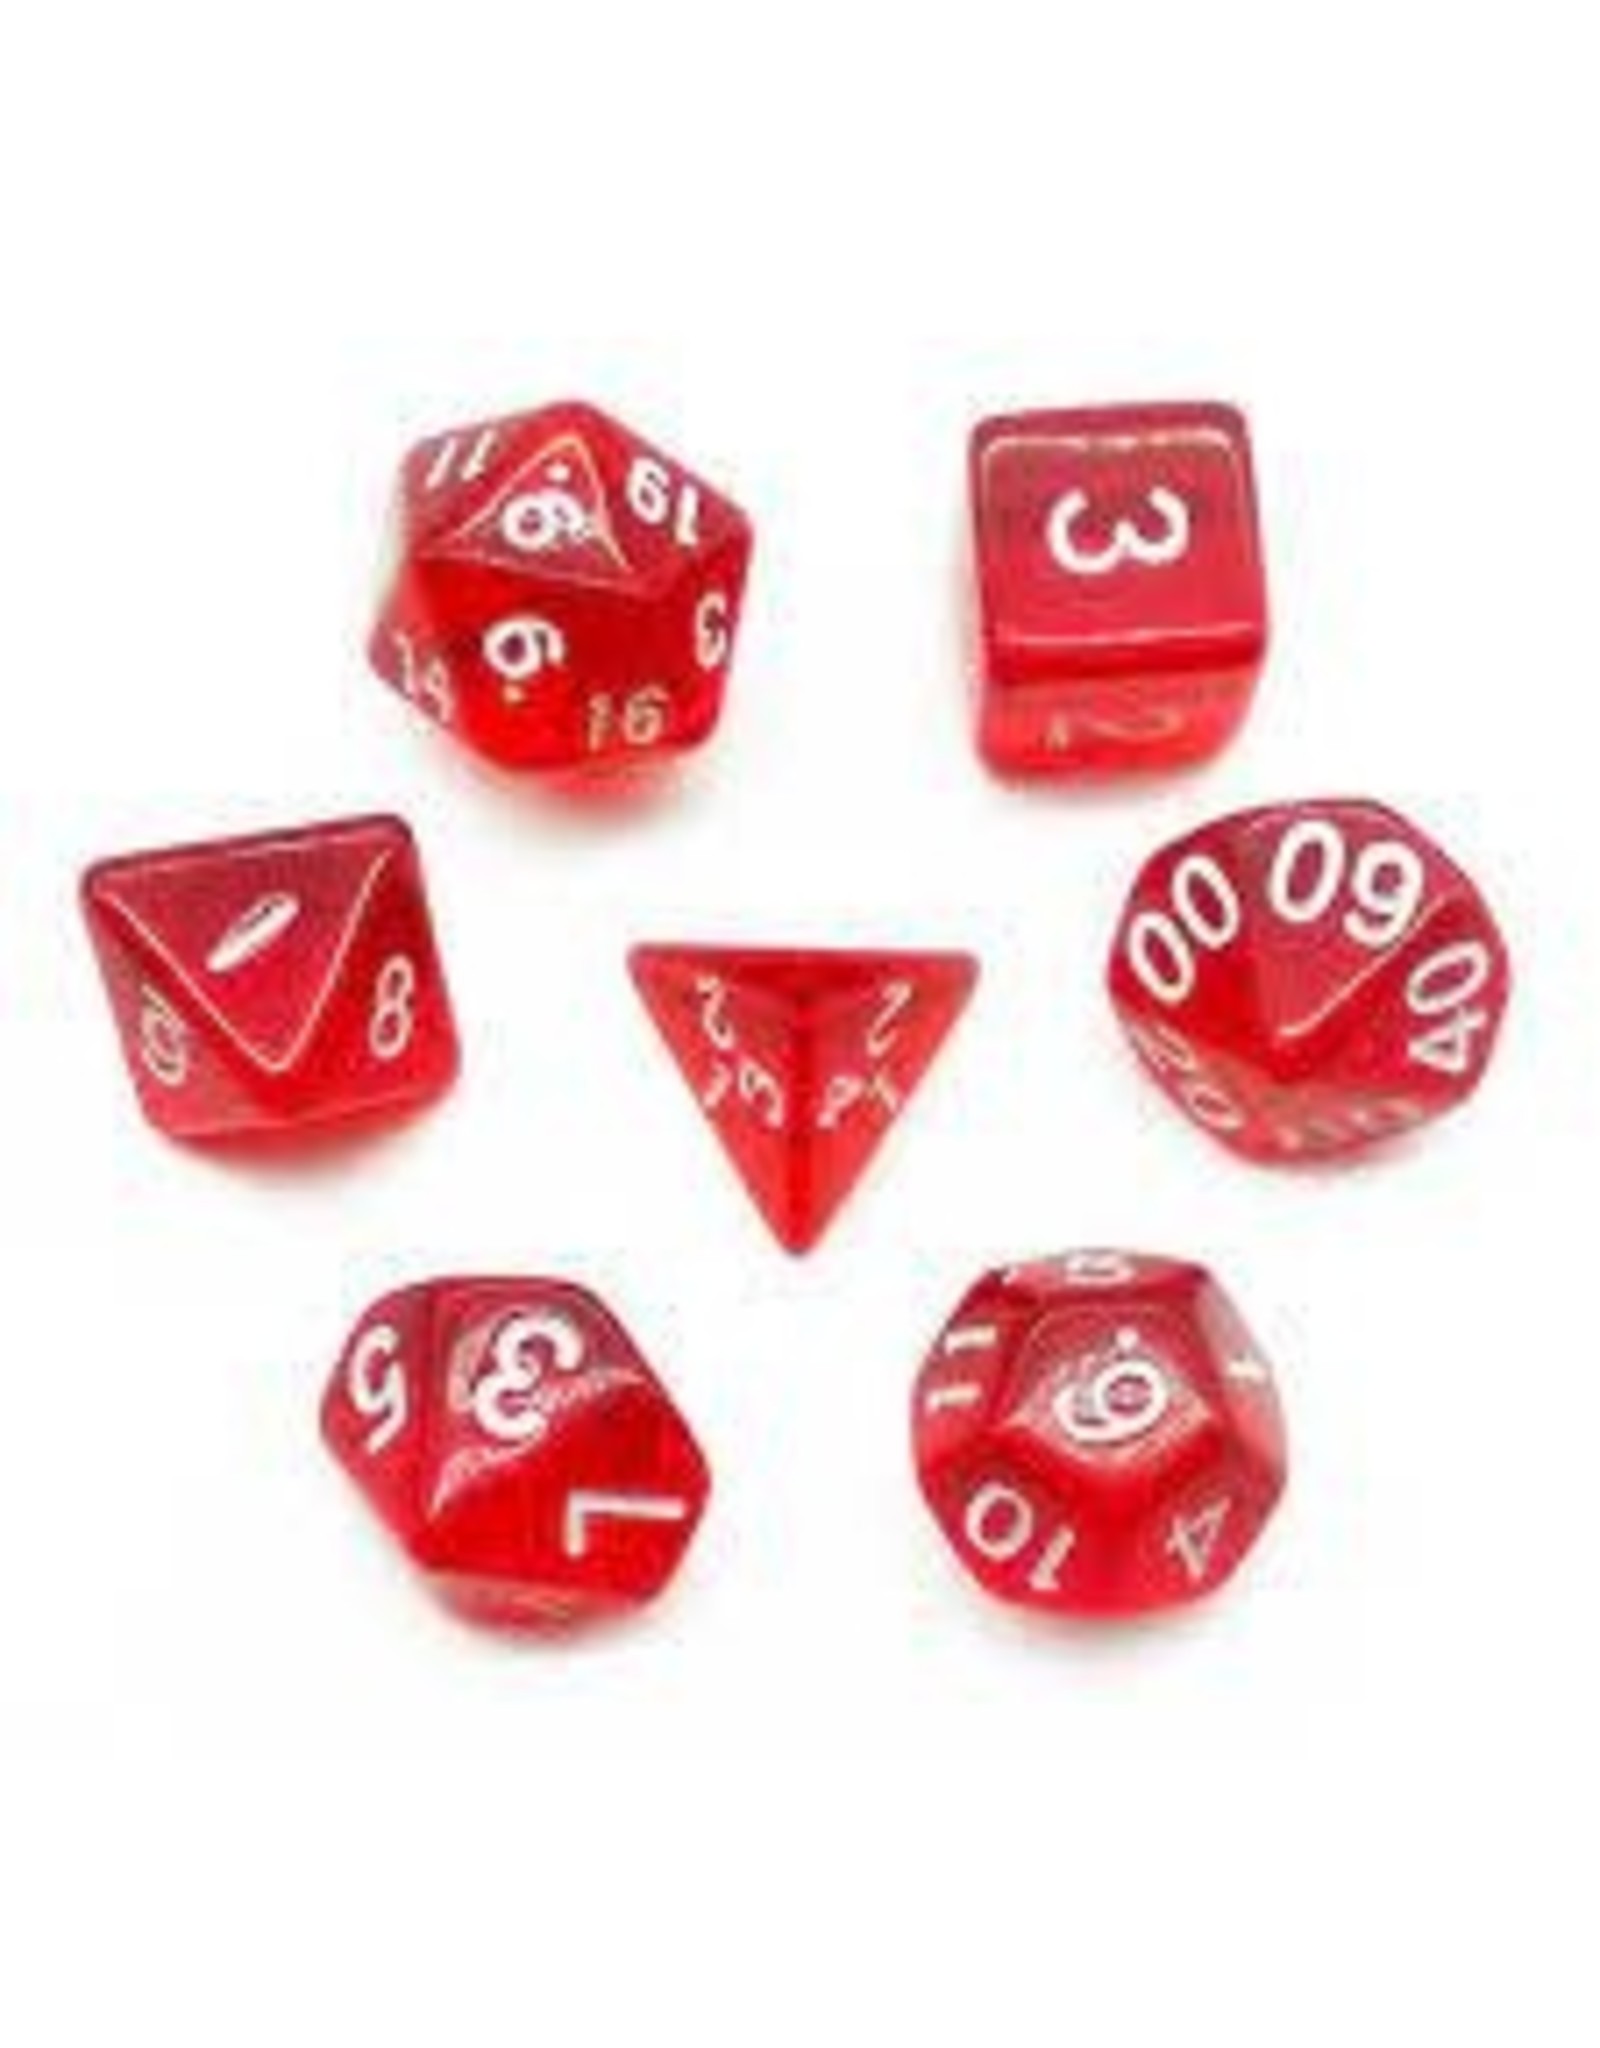 Polyhedral Dice 10 pack